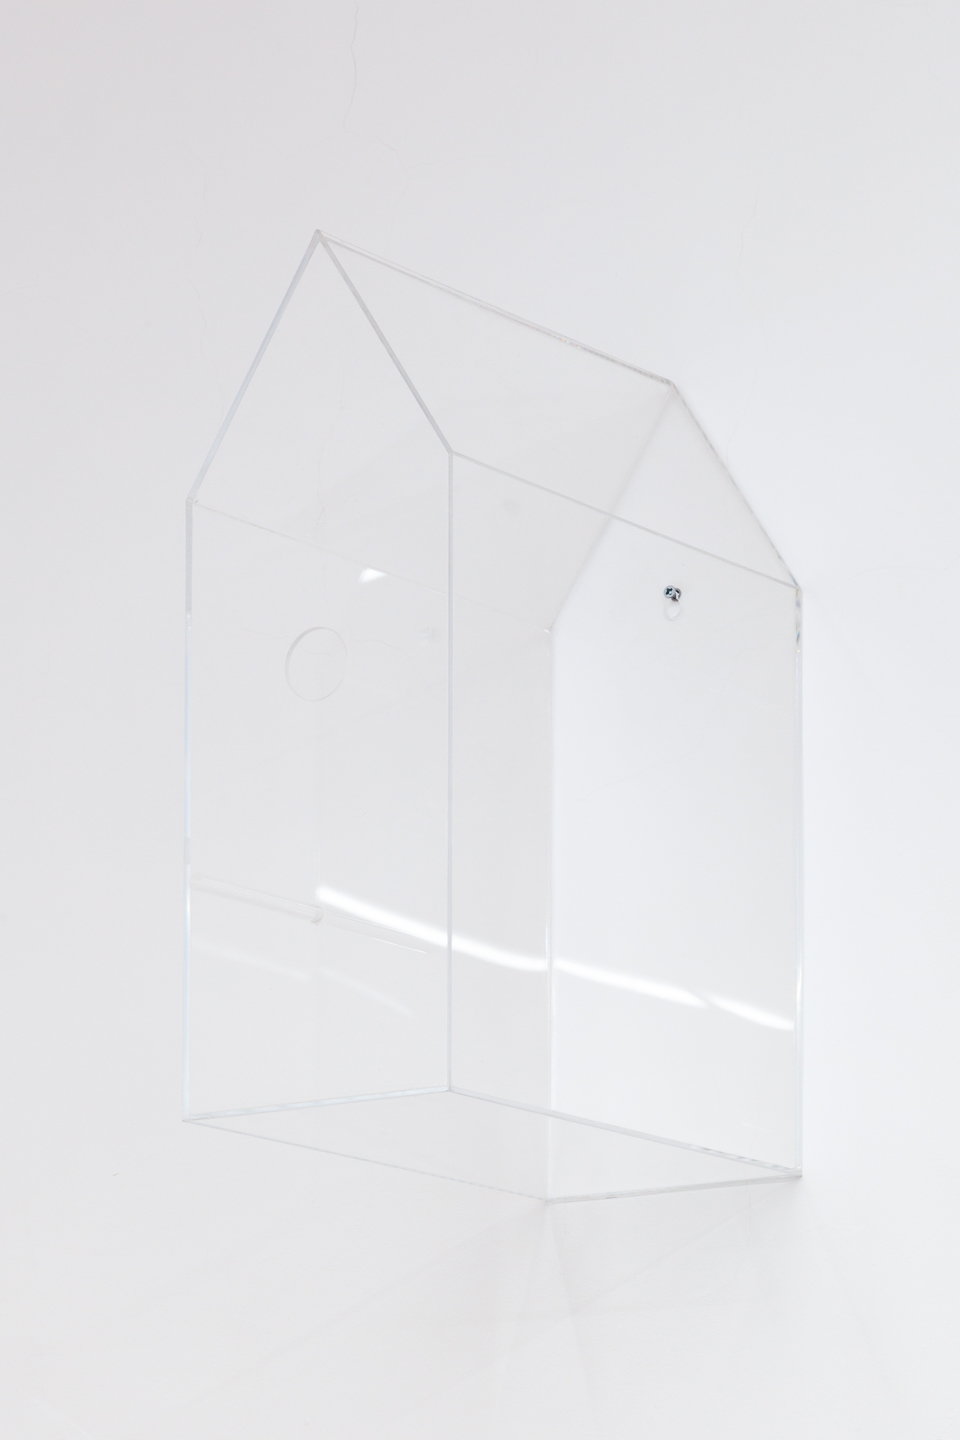 Kerstin von Gabain*1979 in Palo Alto, lives and works in ViennaShelter for beasts (clear) 2021, acrylic glass42 x 15 x 30 cm